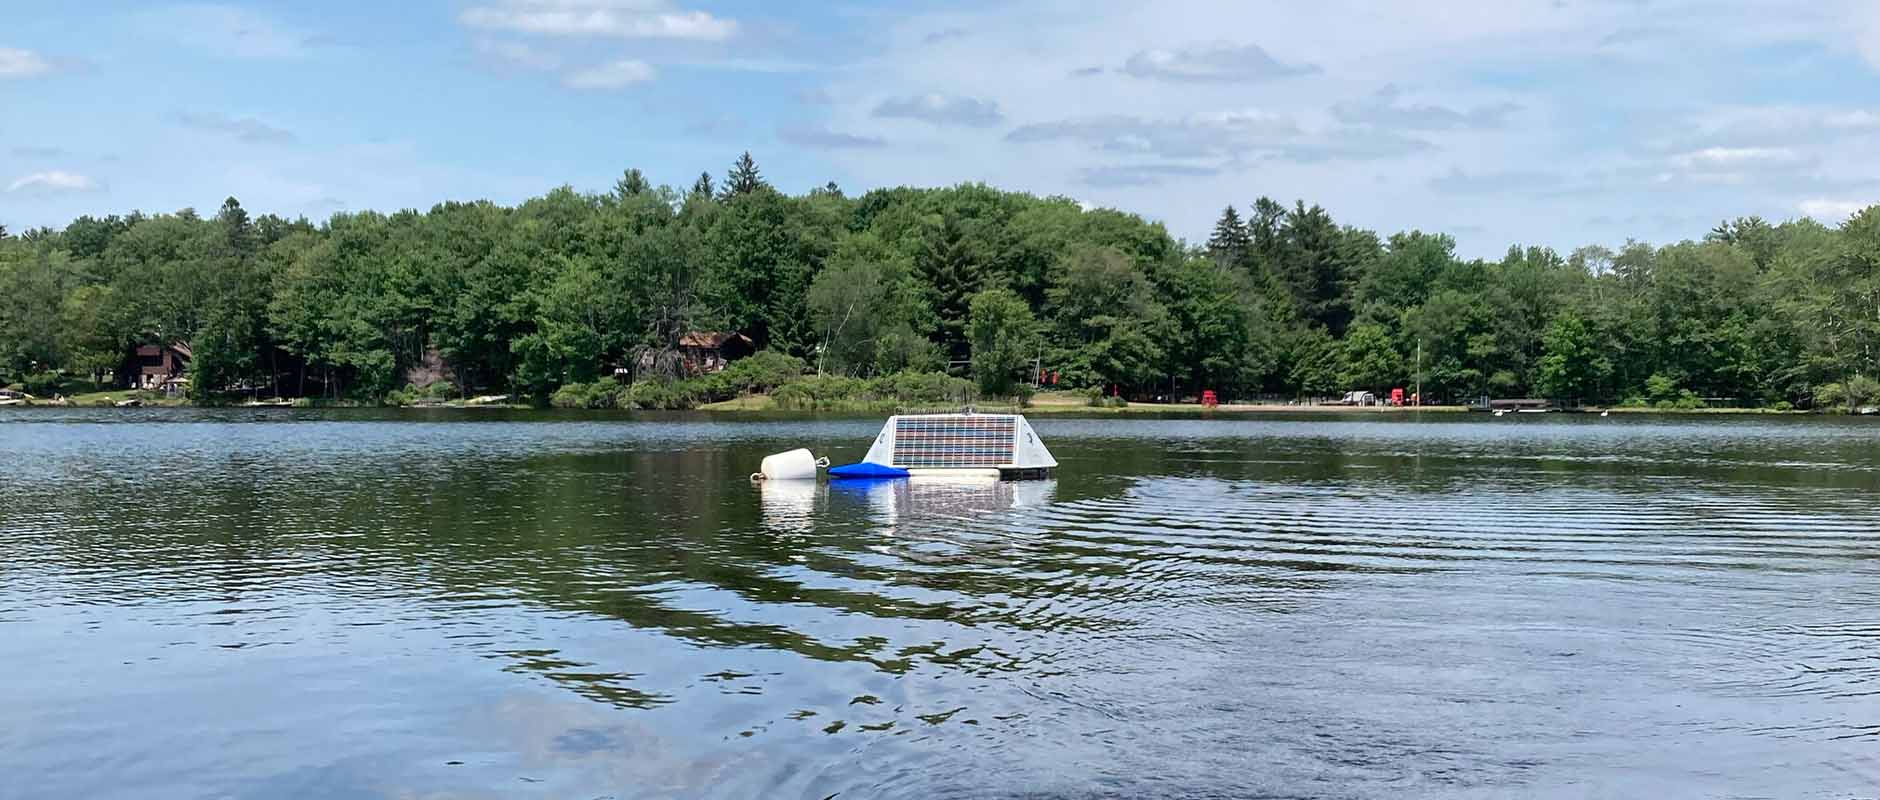 LG Sonic and Smallwood Civic Association Partner for Cleaner Mountain Lake